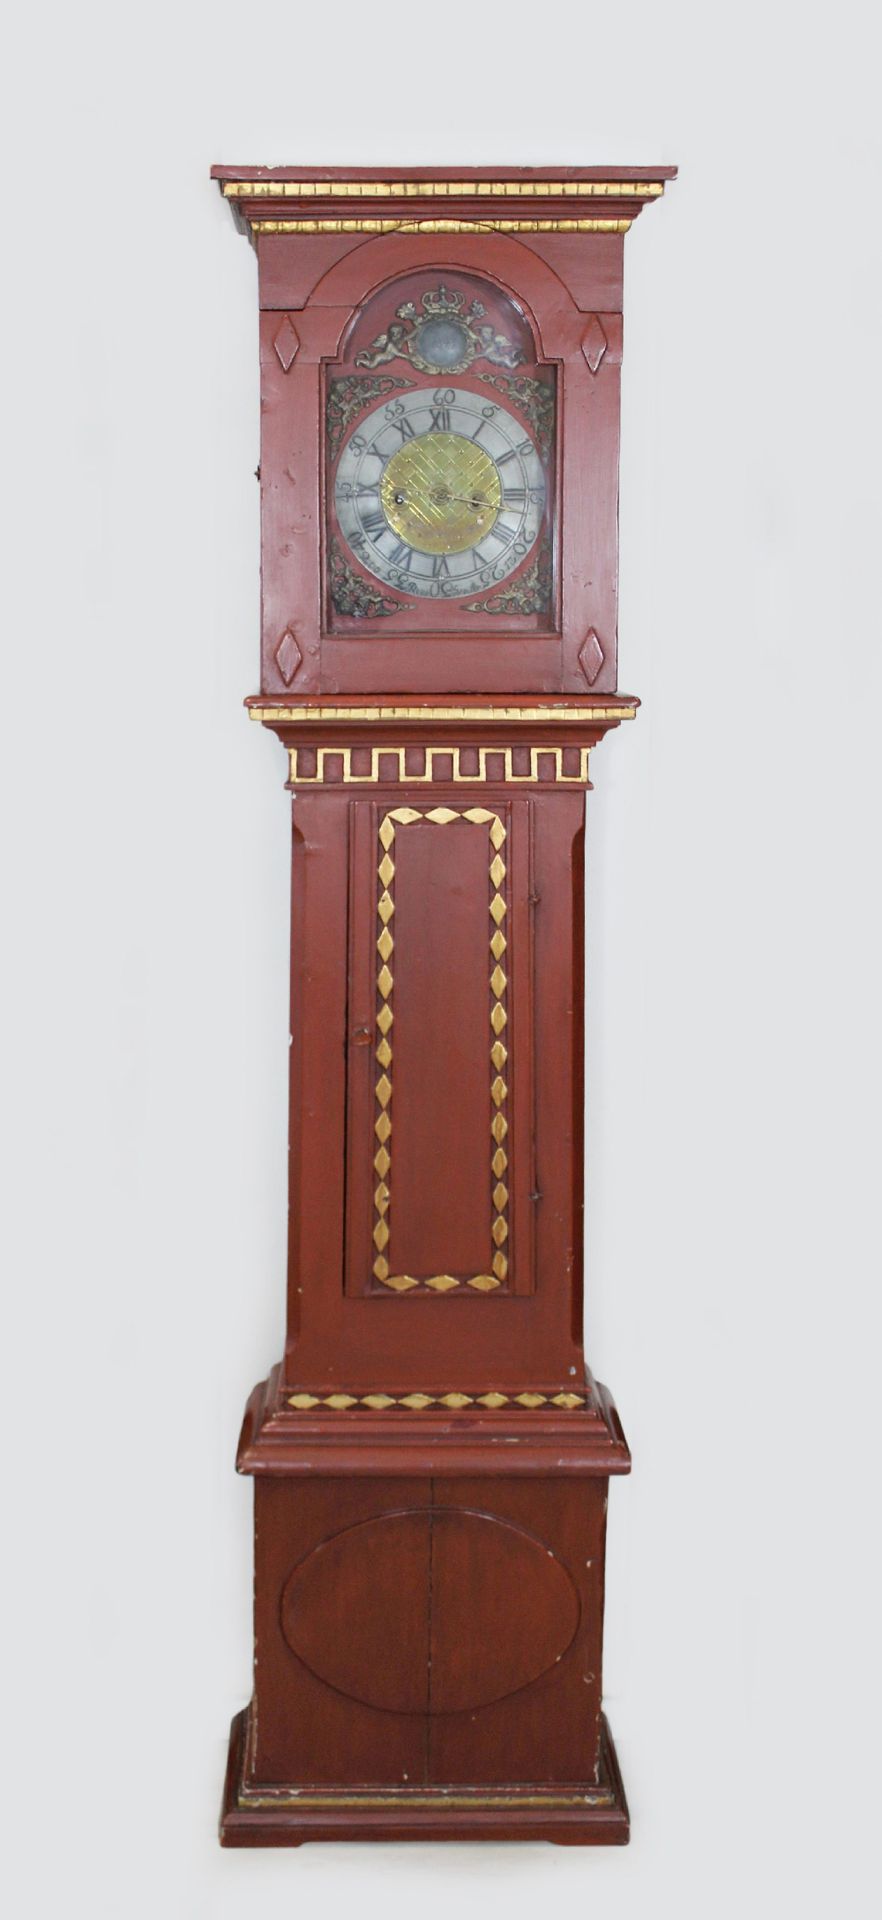 Kleine Standuhr, 19. Jh. Small grandfather clock, 19th century, red coloured, wi&hellip;